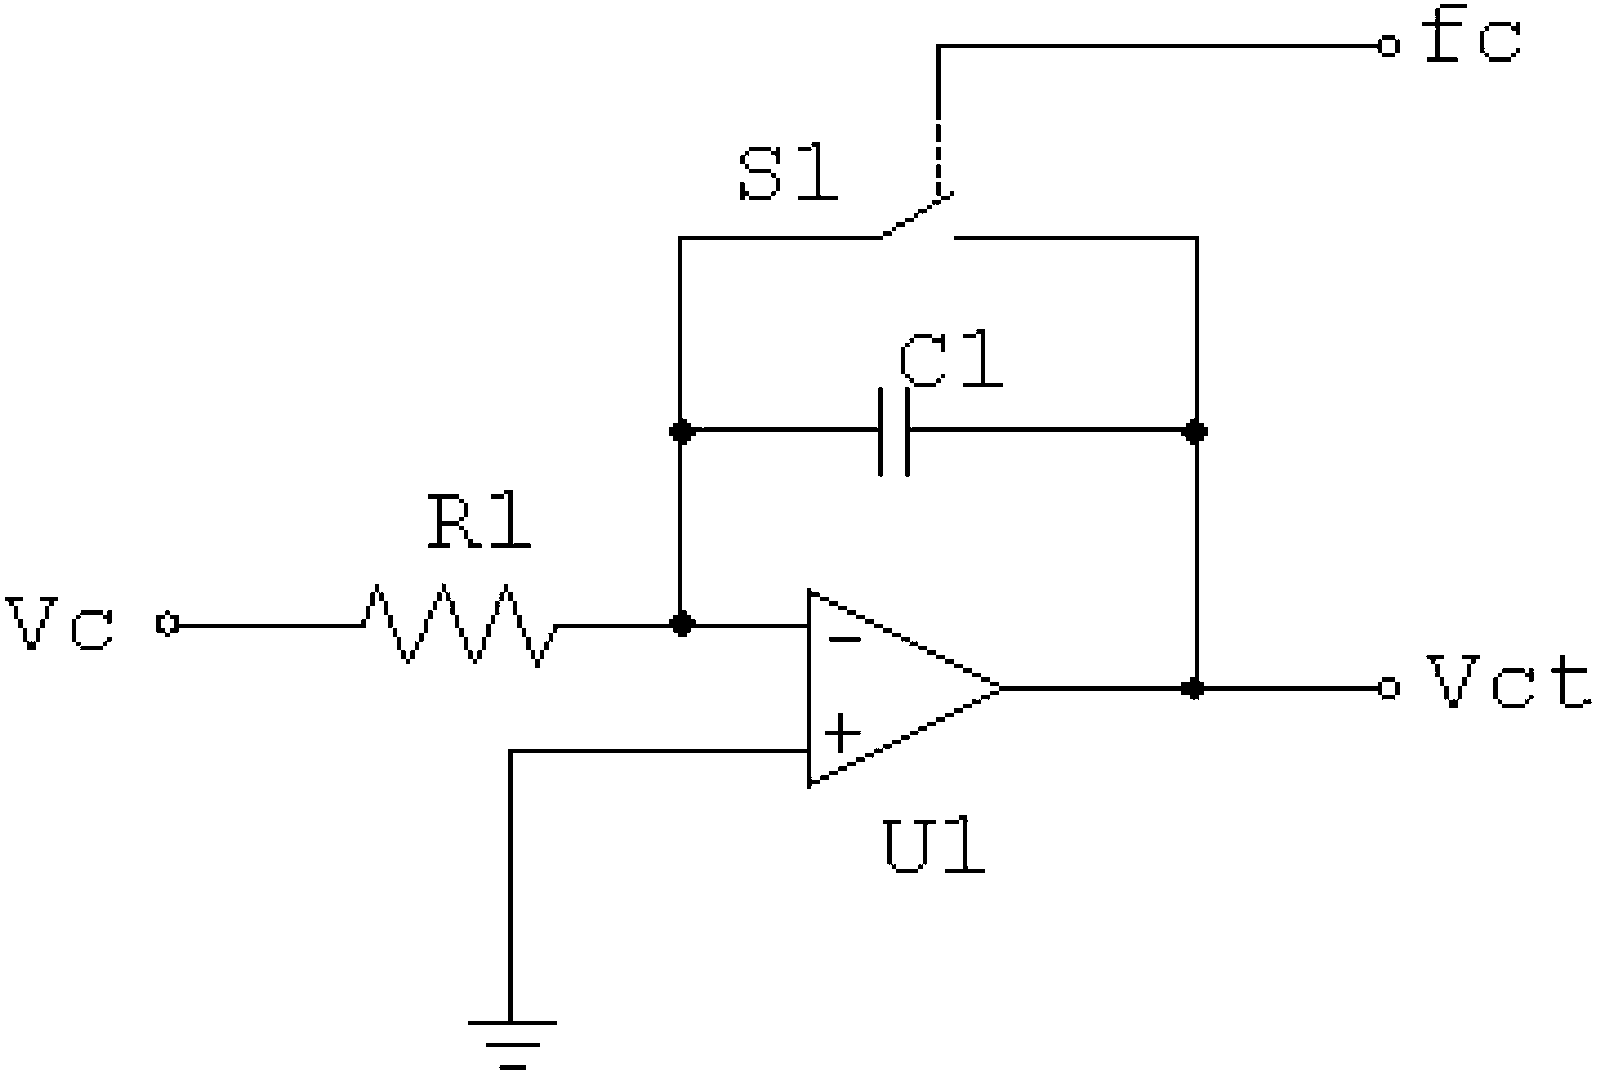 Lossless current detecting circuit based on digital correction